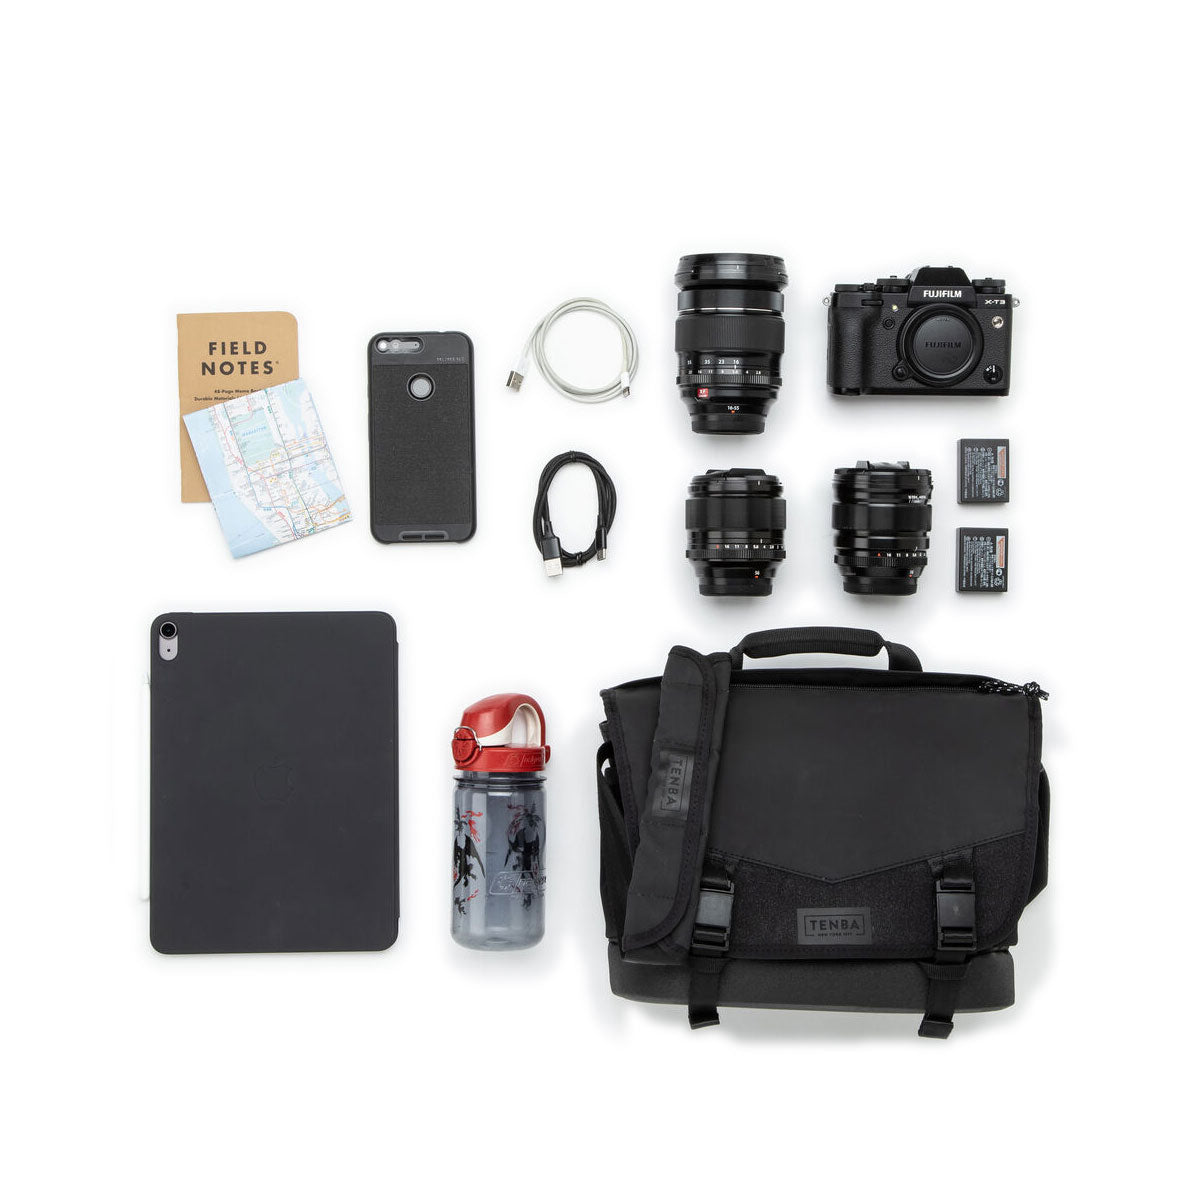 image_note Optional Accessories Shown